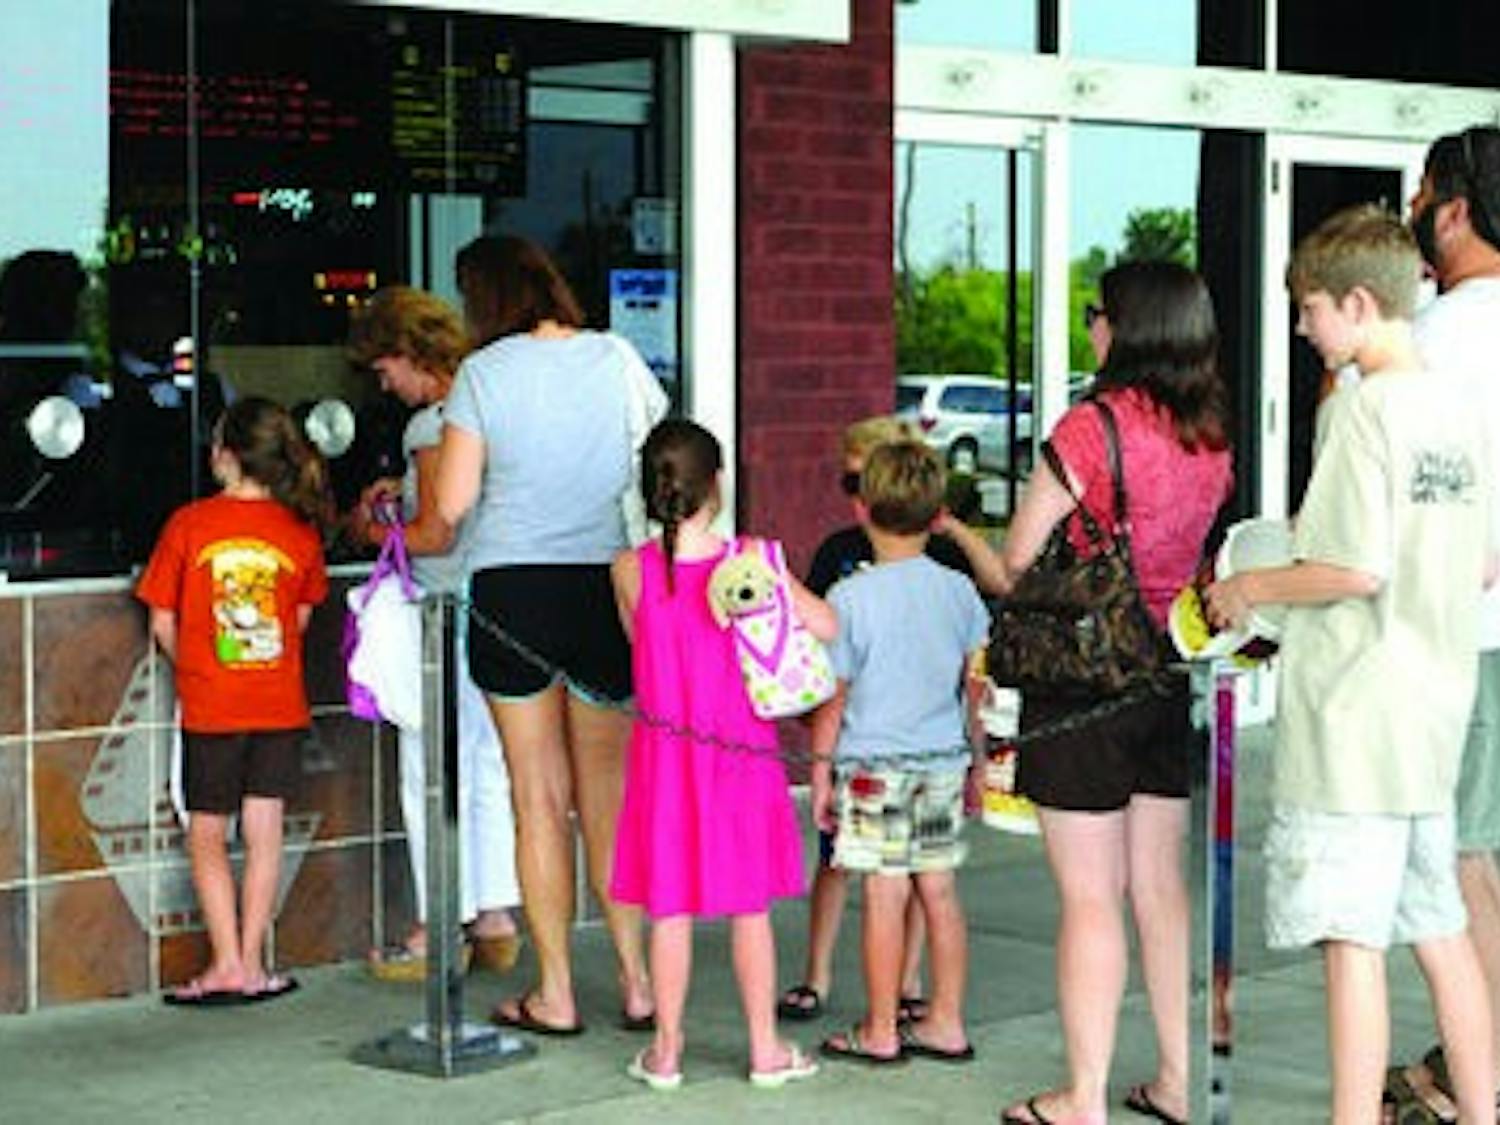 Customers file in line at the box office of Carmike theater to purchase tickets for an afternoon movie.( Christen Harned / ASSISTANT PHOTO EDITOR)